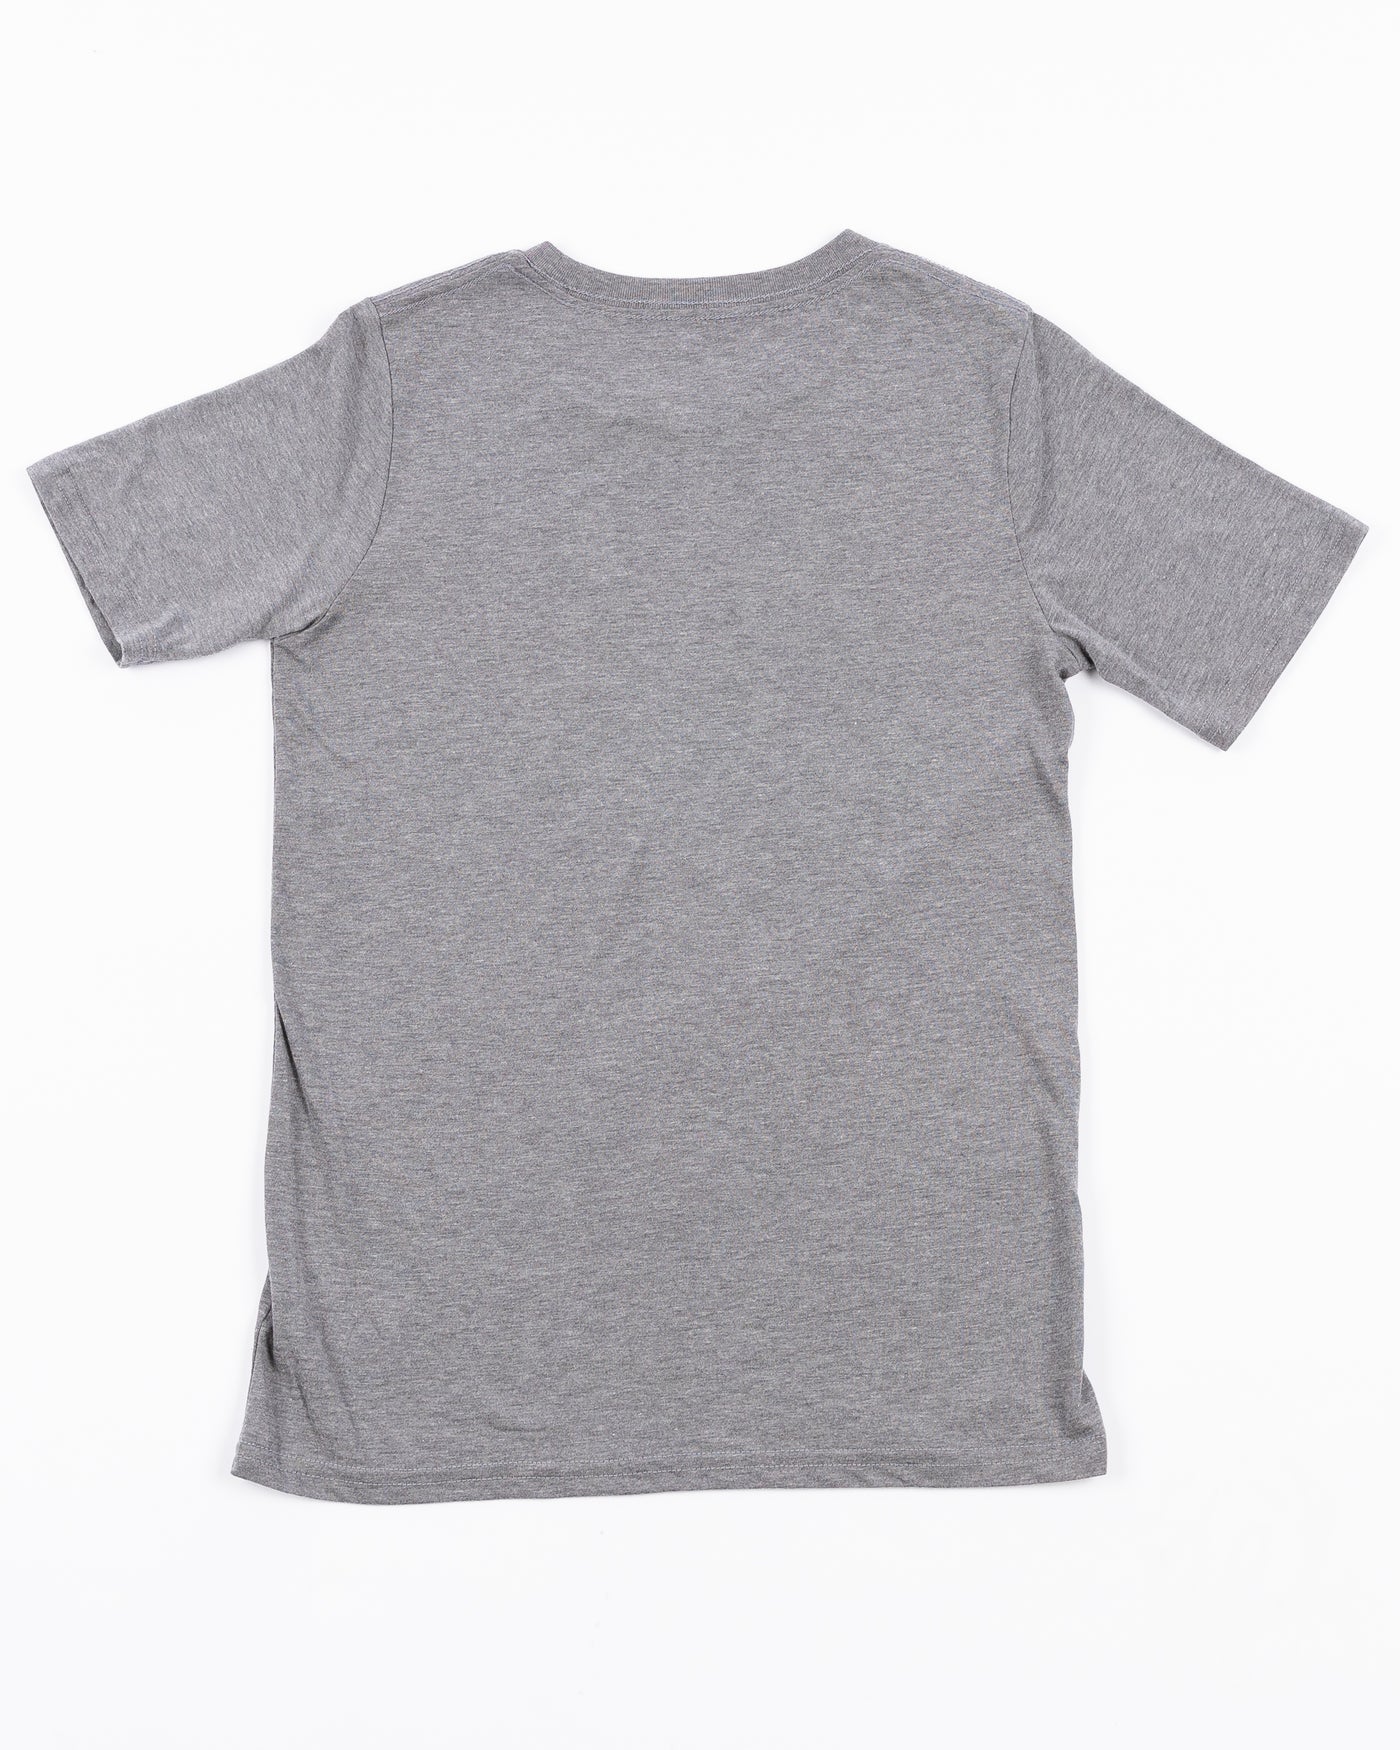 youth heather grey triblend short sleeve tee with Chicago Blackhawks primary logo across front - back lay flat